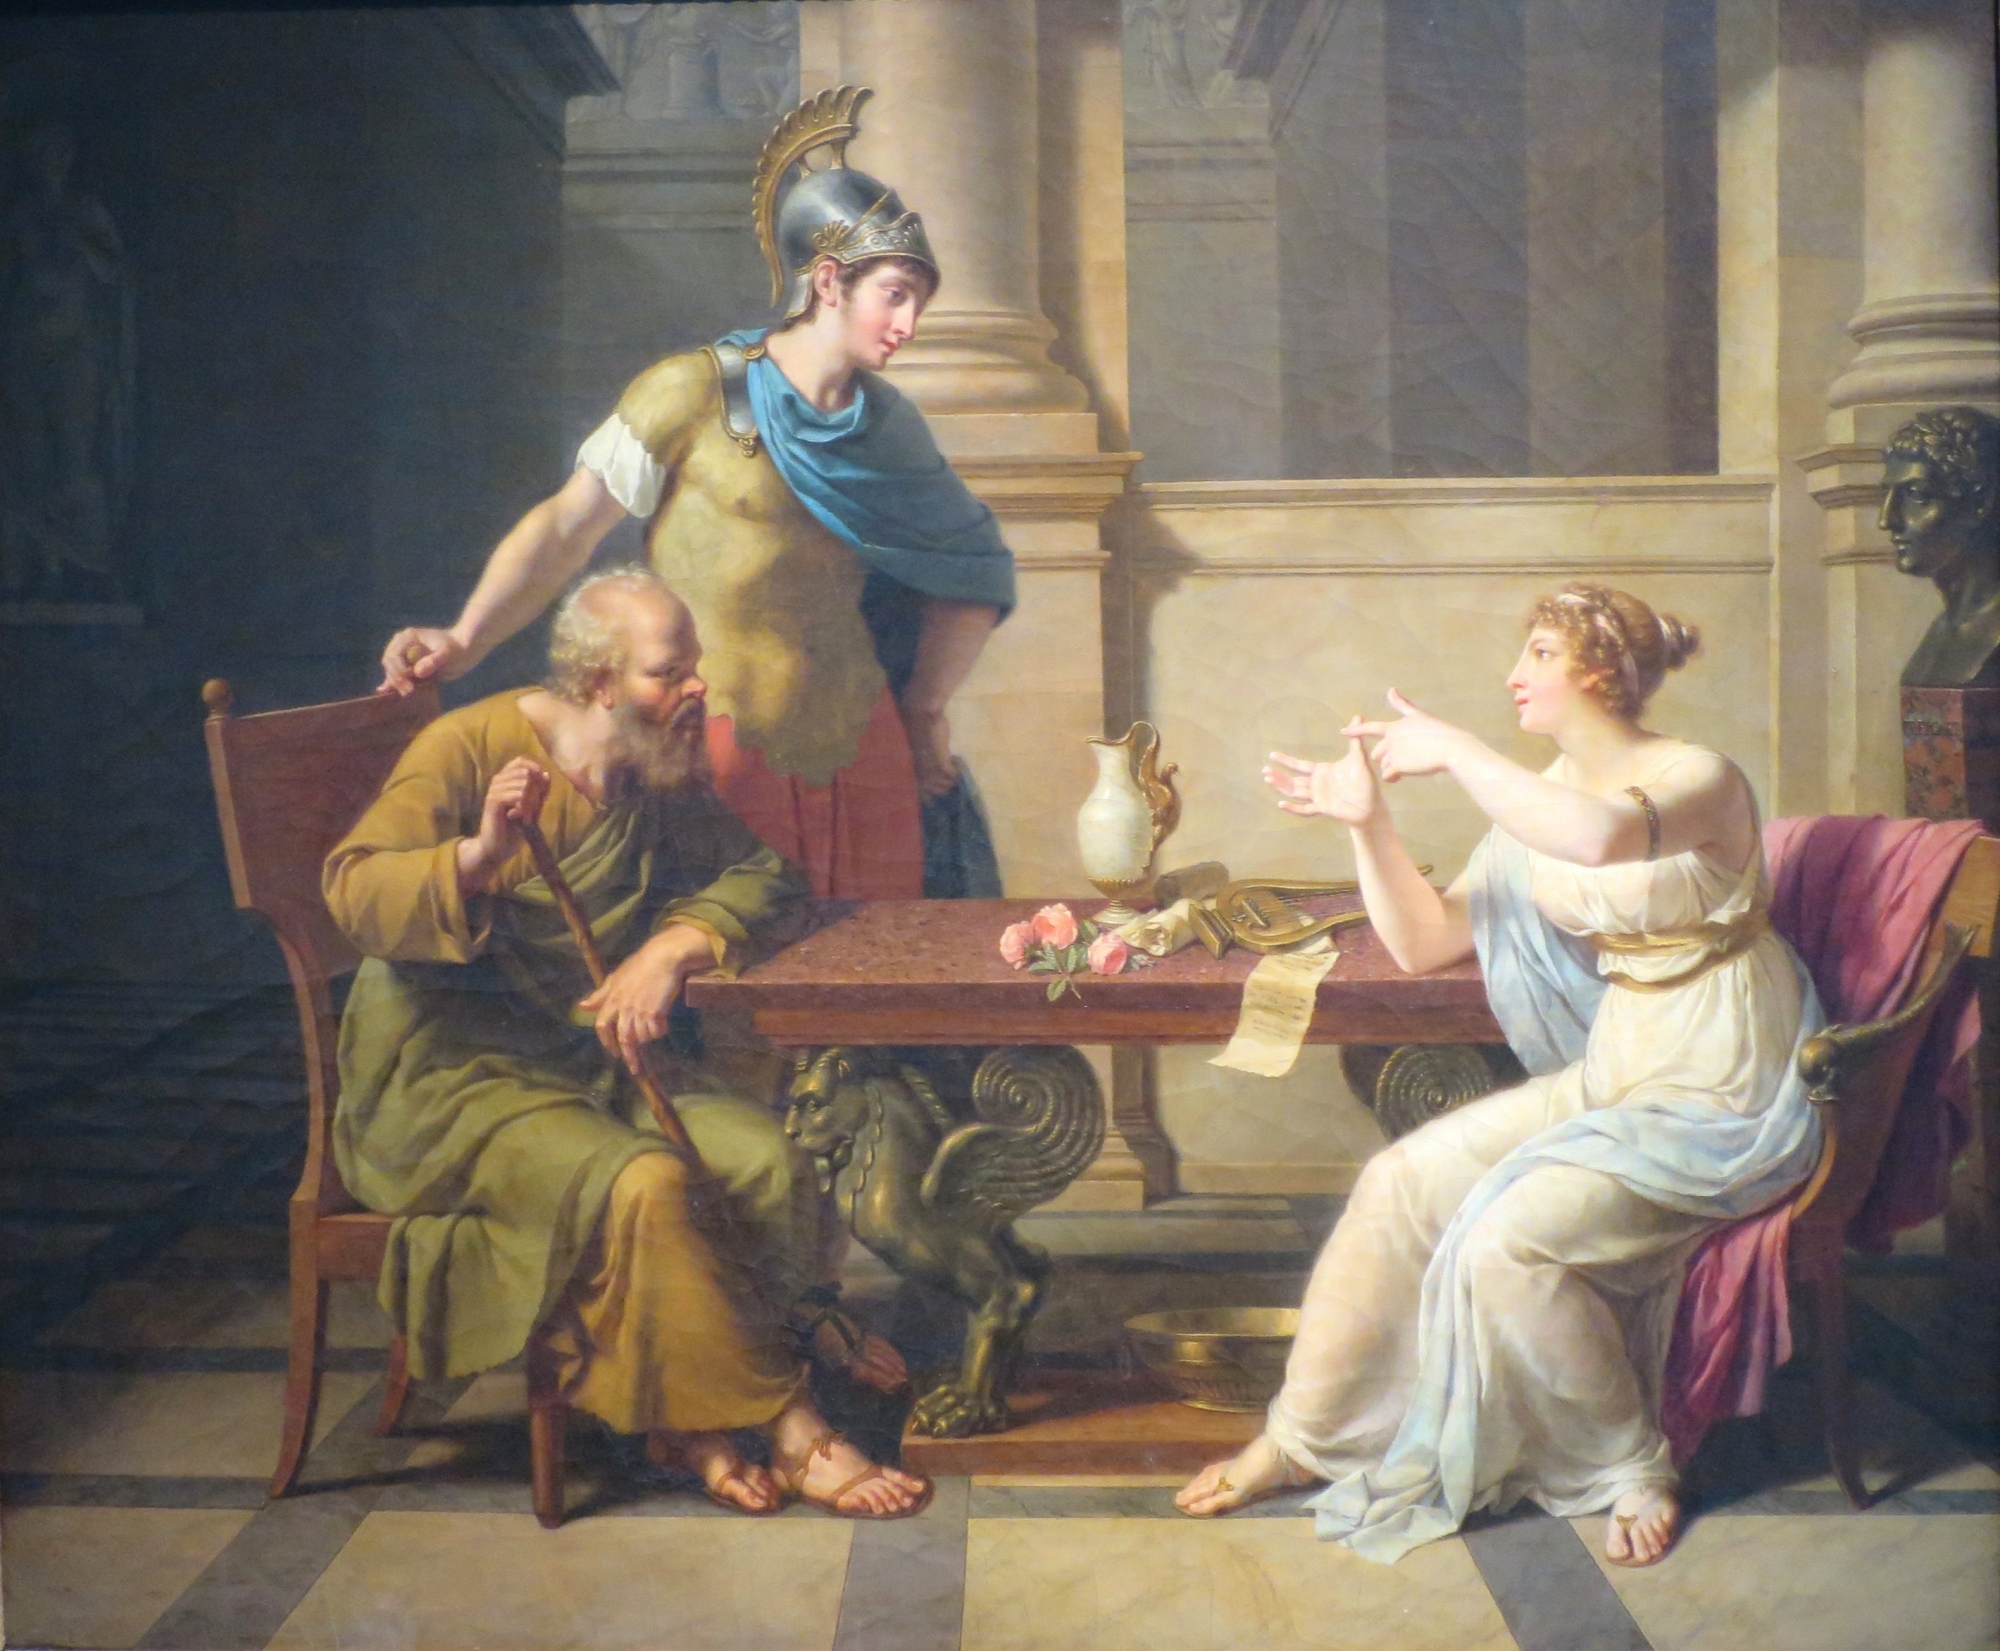 Travels Through Time The Debate Of Socrates And Aspasia